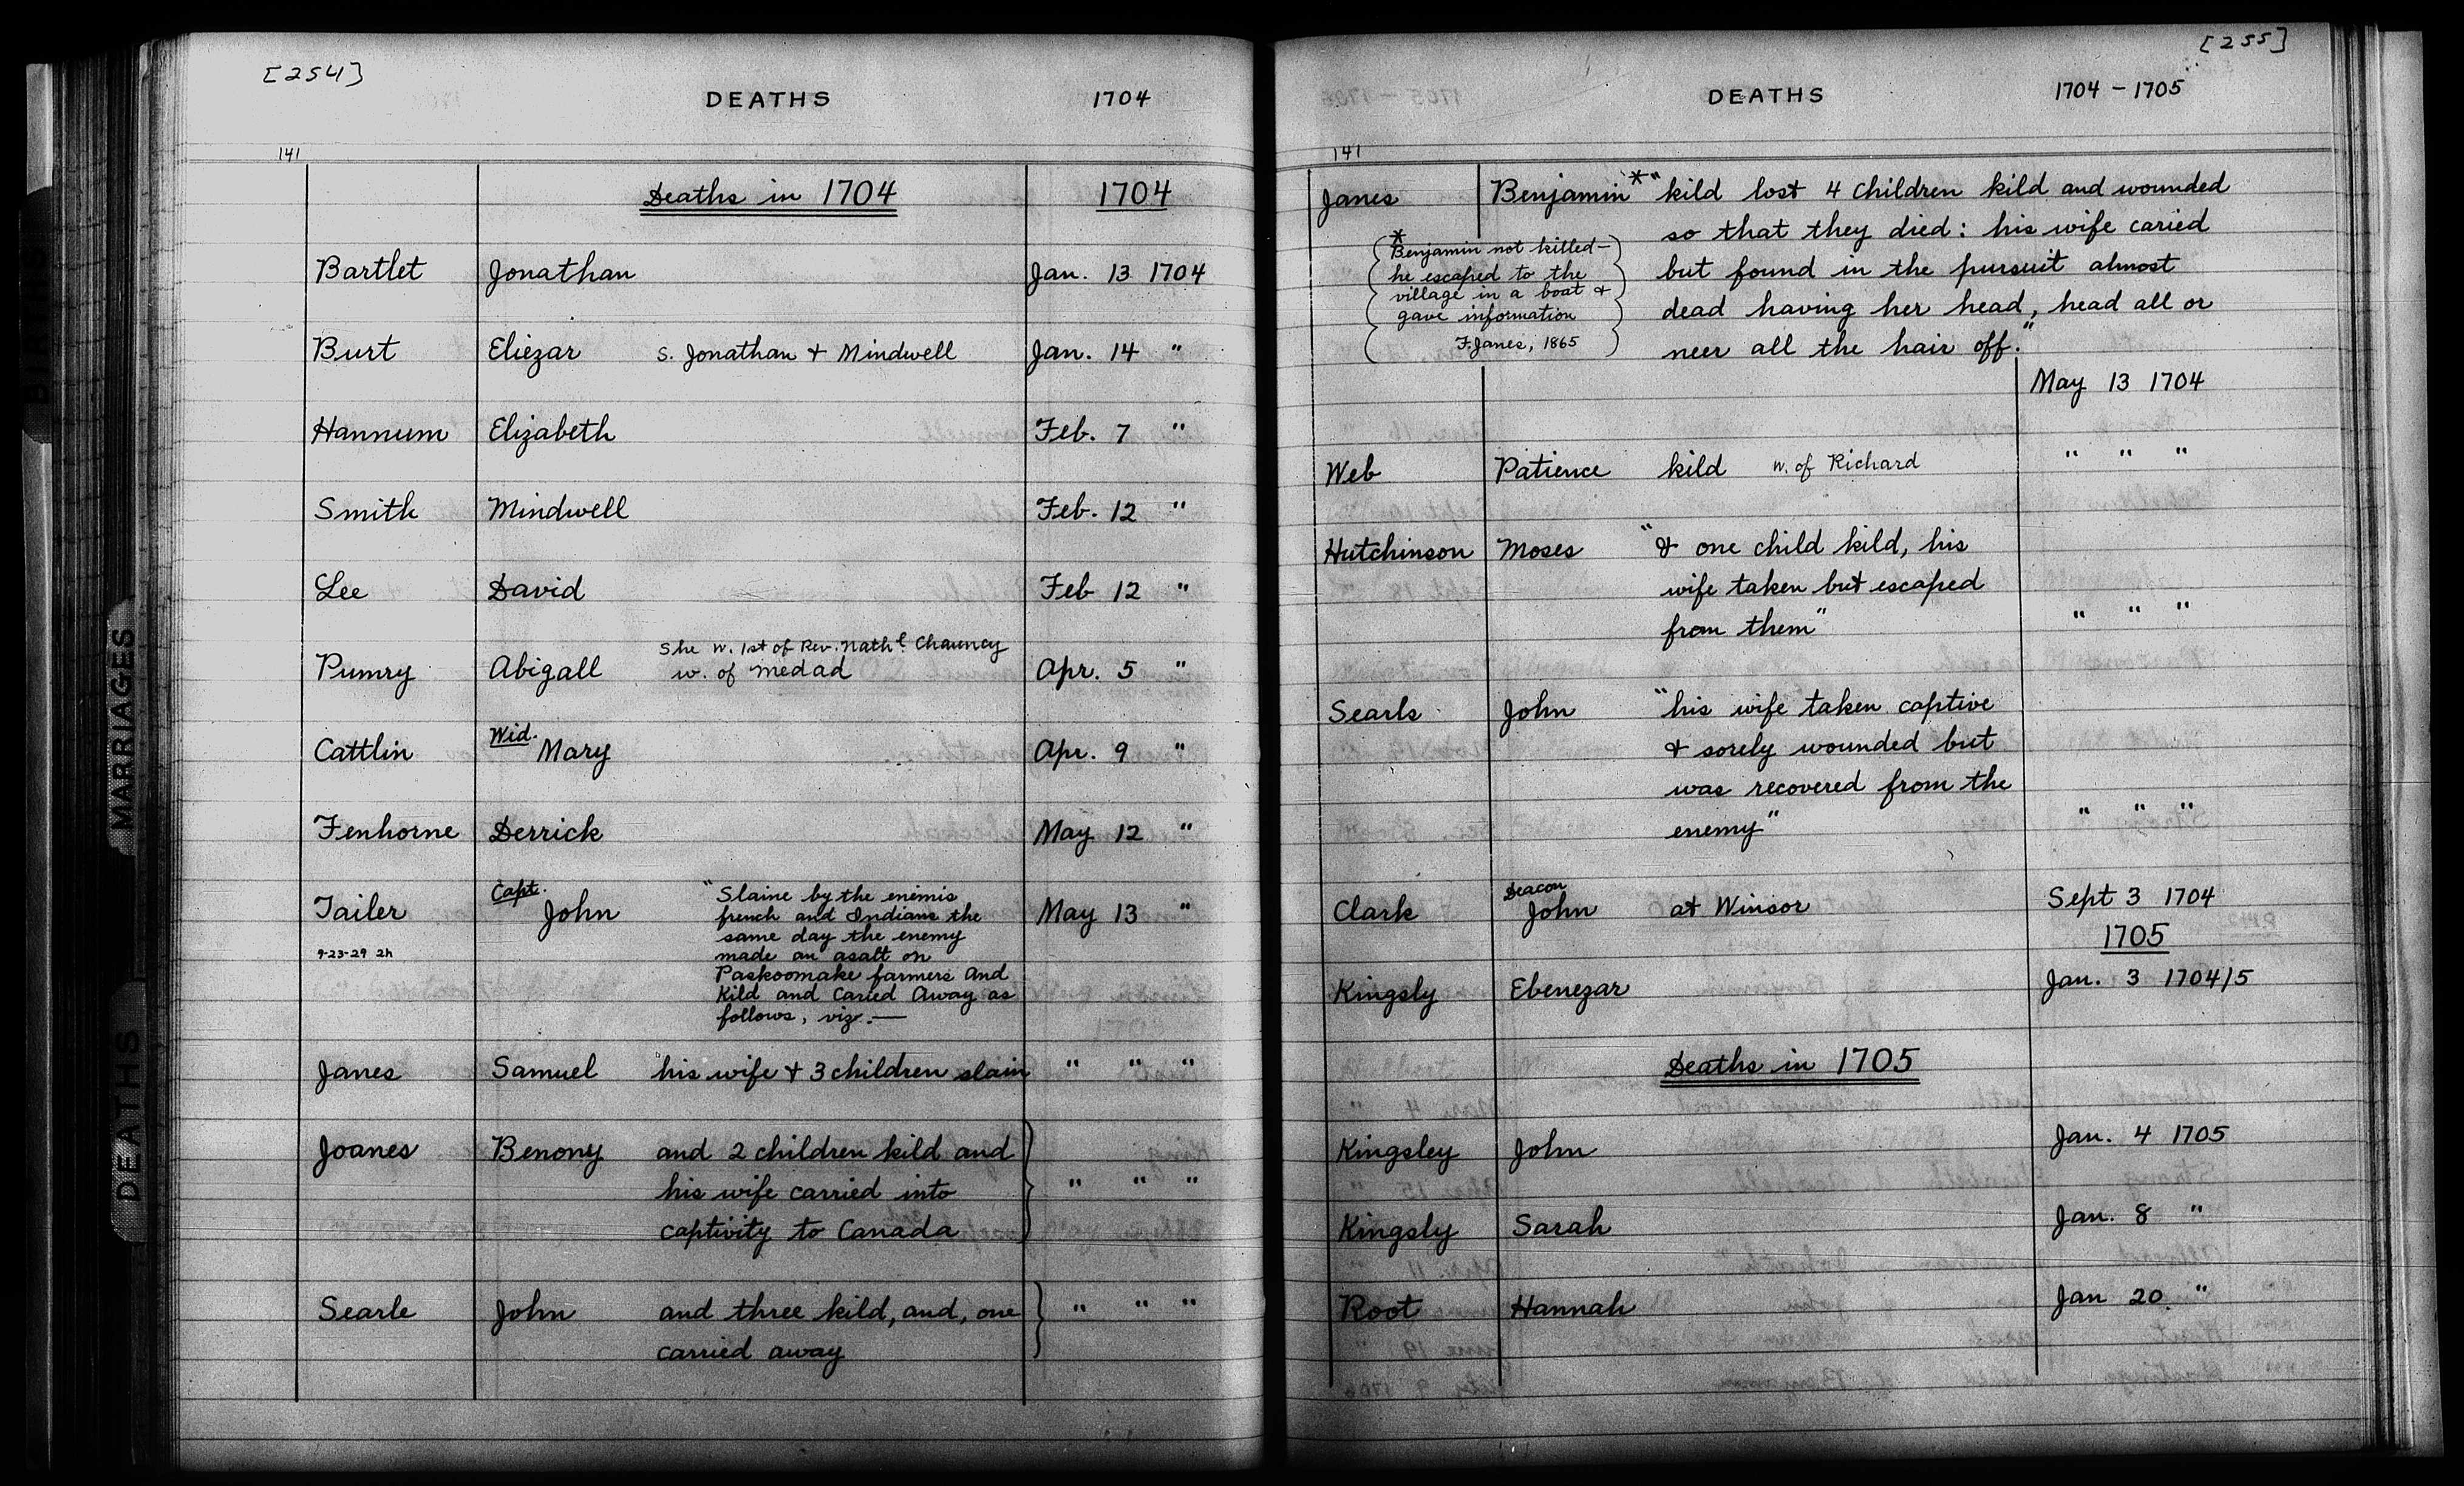 The deaths of the Janes children and scalping of Hannah, described in town records